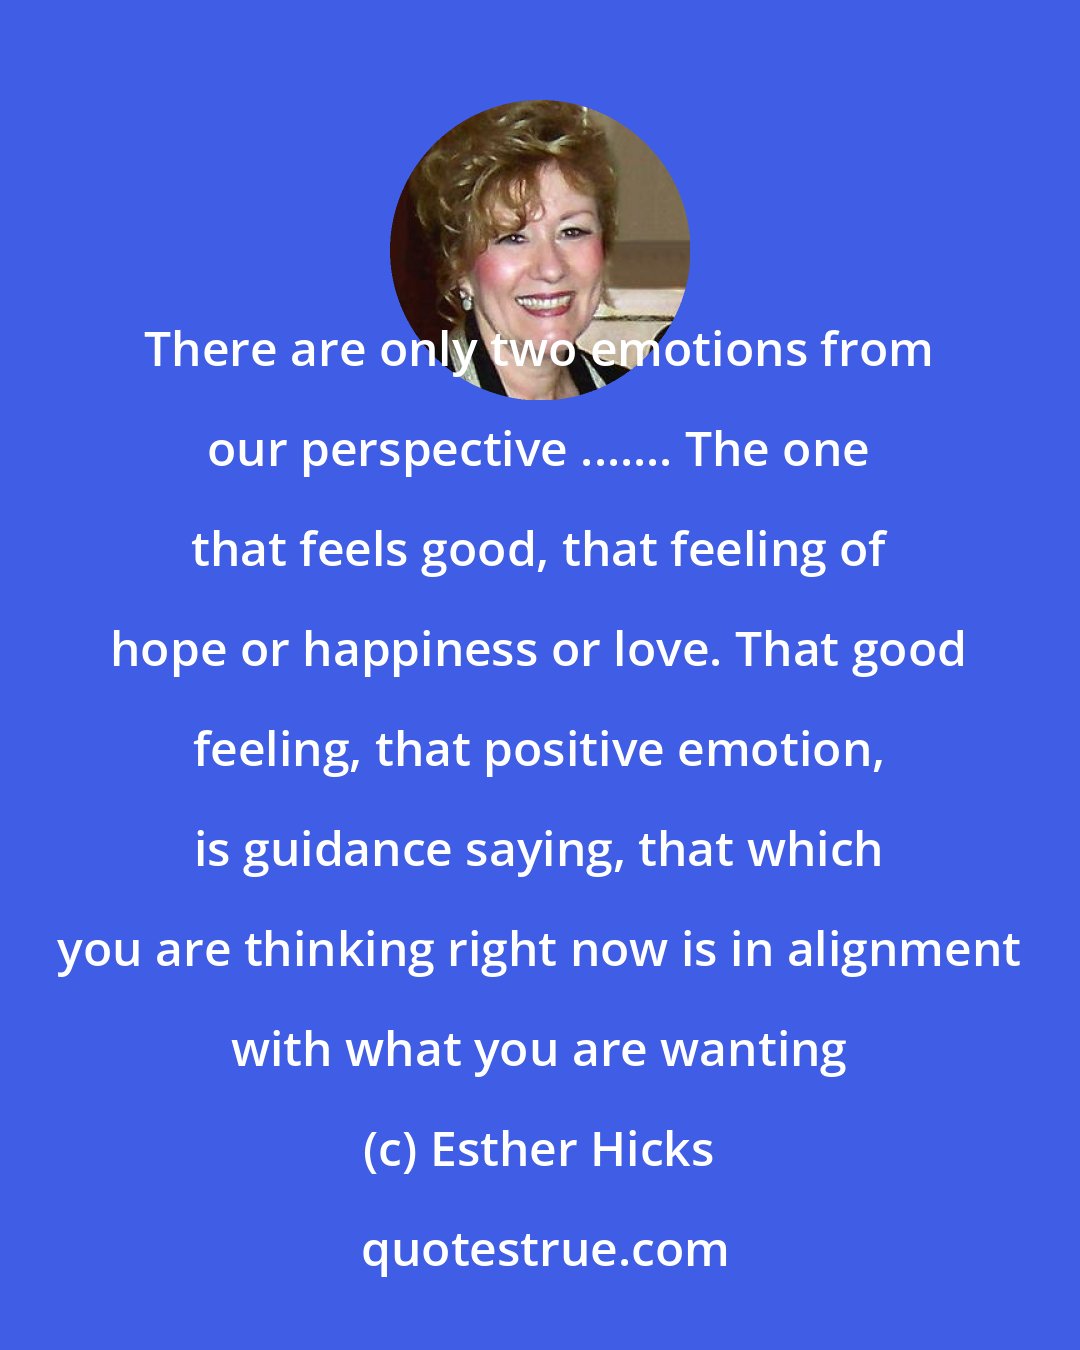 Esther Hicks: There are only two emotions from our perspective ....... The one that feels good, that feeling of hope or happiness or love. That good feeling, that positive emotion, is guidance saying, that which you are thinking right now is in alignment with what you are wanting